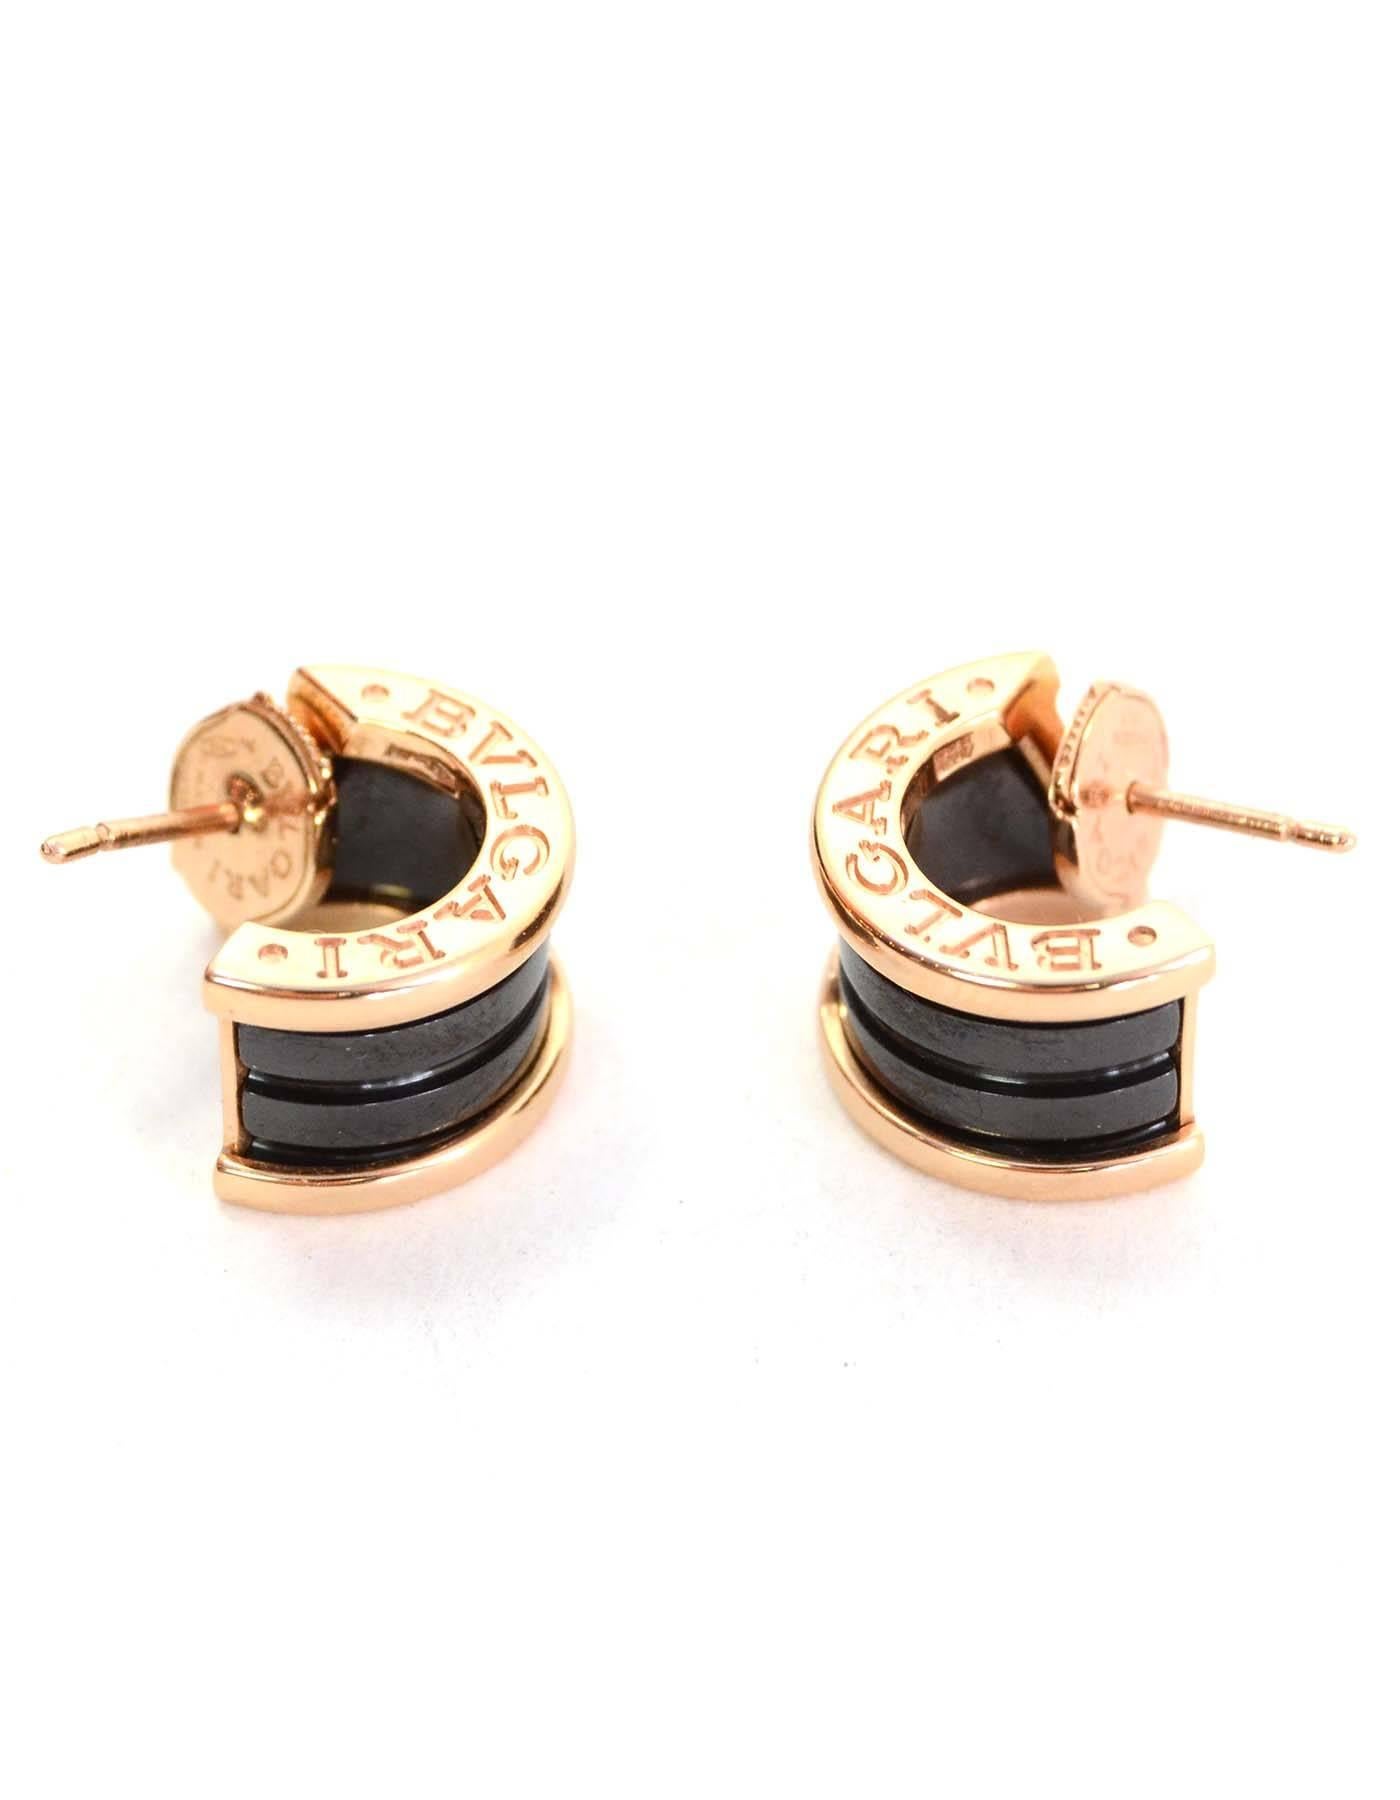 Bvlgari B.zero1 18k Pink Gold Earrings

Features black ceramic, engraved logo and push-back closure.

Year of Production: 2015
Color: Pink and black
Materials: 18k pink gold and ceramic
Closure: Push-back
Stamp: BVLGARI Made in Italy